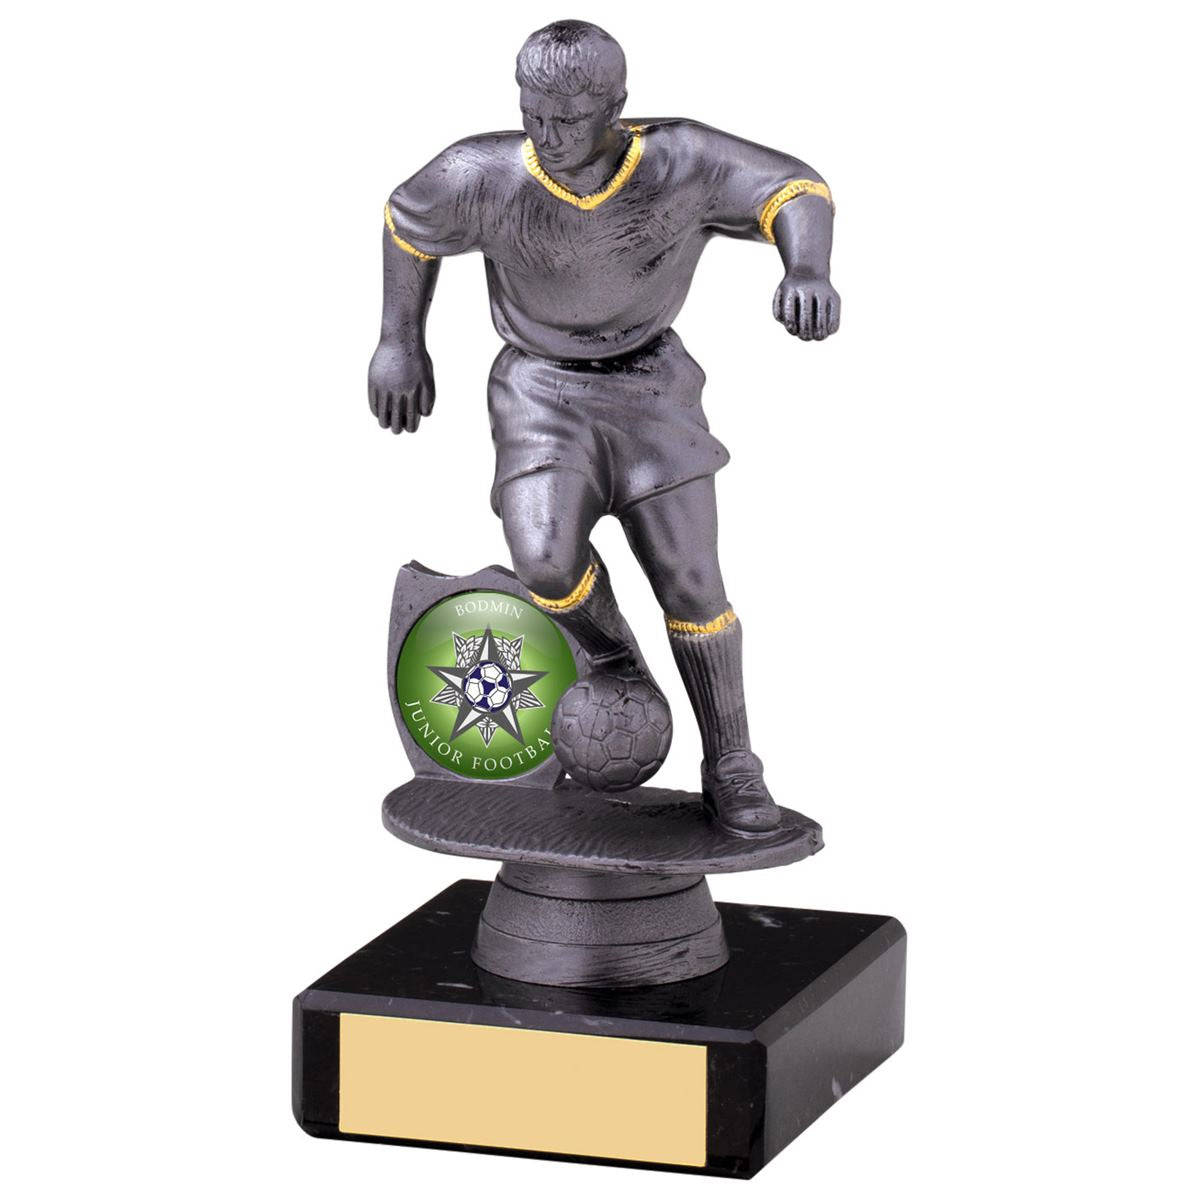 Mens Football Silver Trophies Awards - Pack of 16